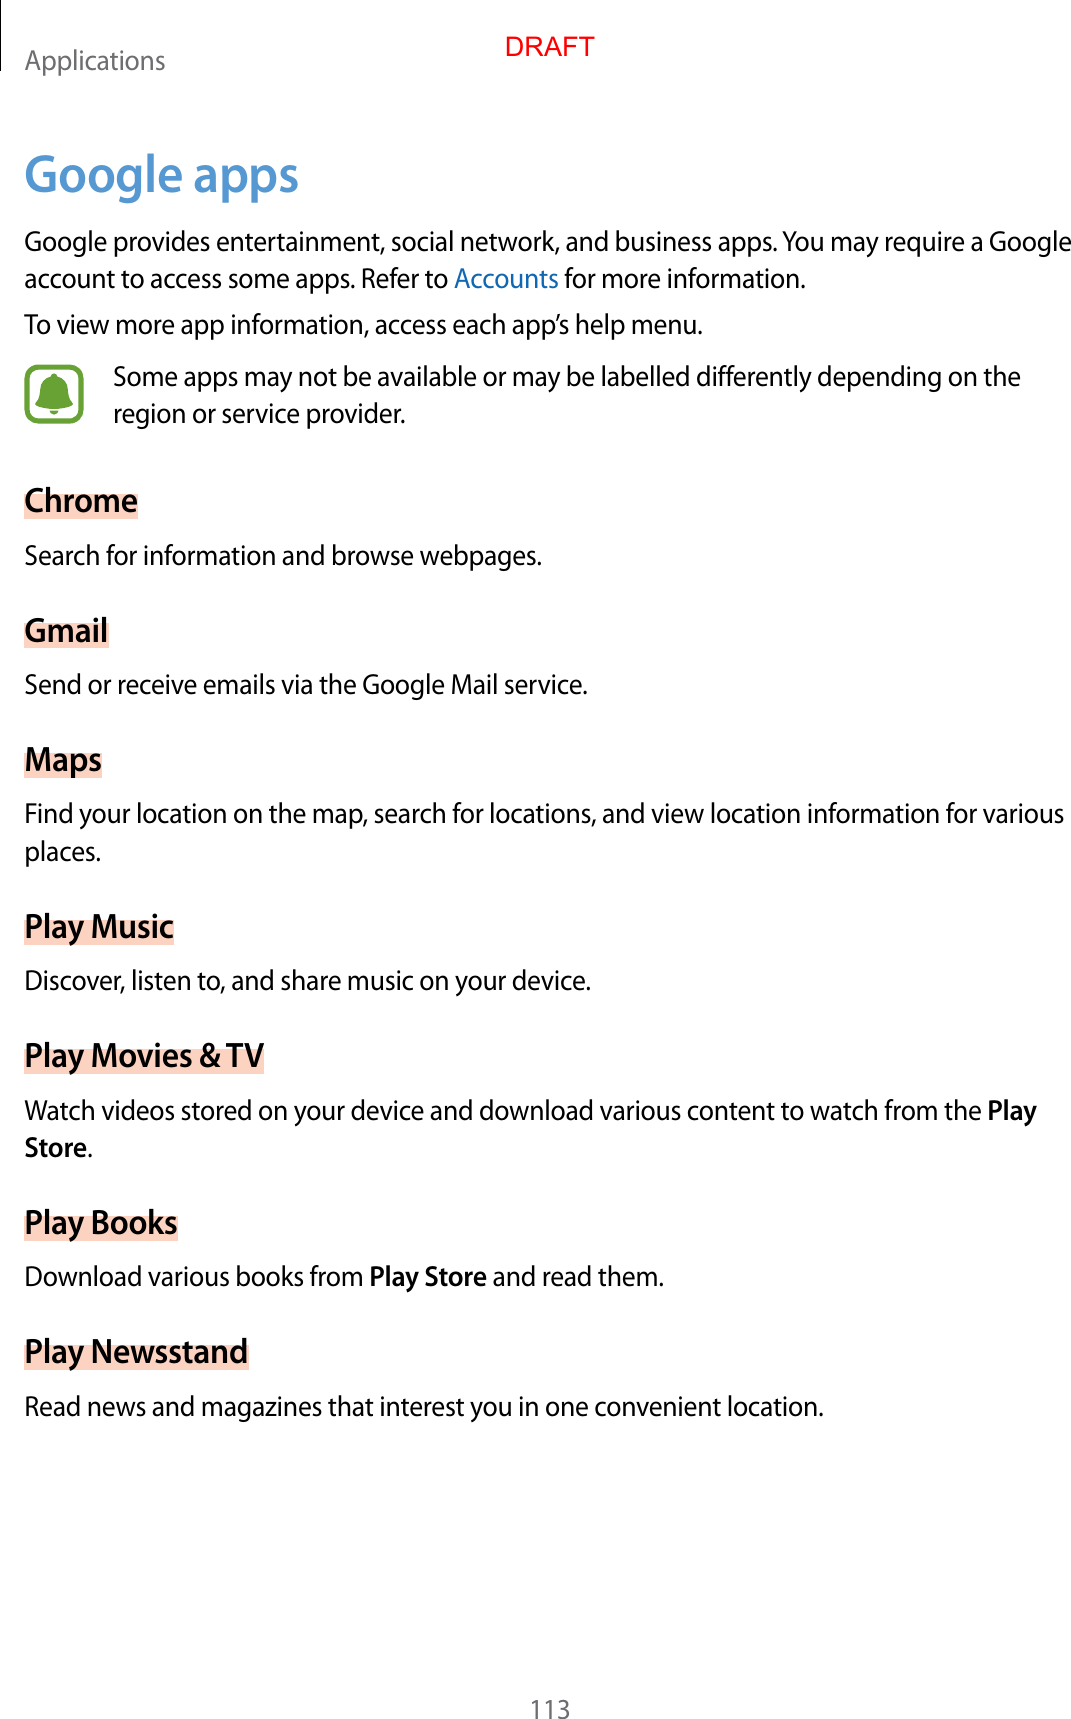 Applications113Google appsGoogle provides entertainment, social network, and business apps. You may require a Google account to access some apps. Refer to Accounts for more information.To view more app information, access each app’s help menu.Some apps may not be available or may be labelled differently depending on the region or service provider.ChromeSearch for information and browse webpages.GmailSend or receive emails via the Google Mail service.MapsFind your location on the map, search for locations, and view location information for various places.Play MusicDiscover, listen to, and share music on your device.Play Movies &amp; TVWatch videos stored on your device and download various content to watch from the Play Store.Play BooksDownload various books from Play Store and read them.Play NewsstandRead news and magazines that interest you in one convenient location.DRAFT